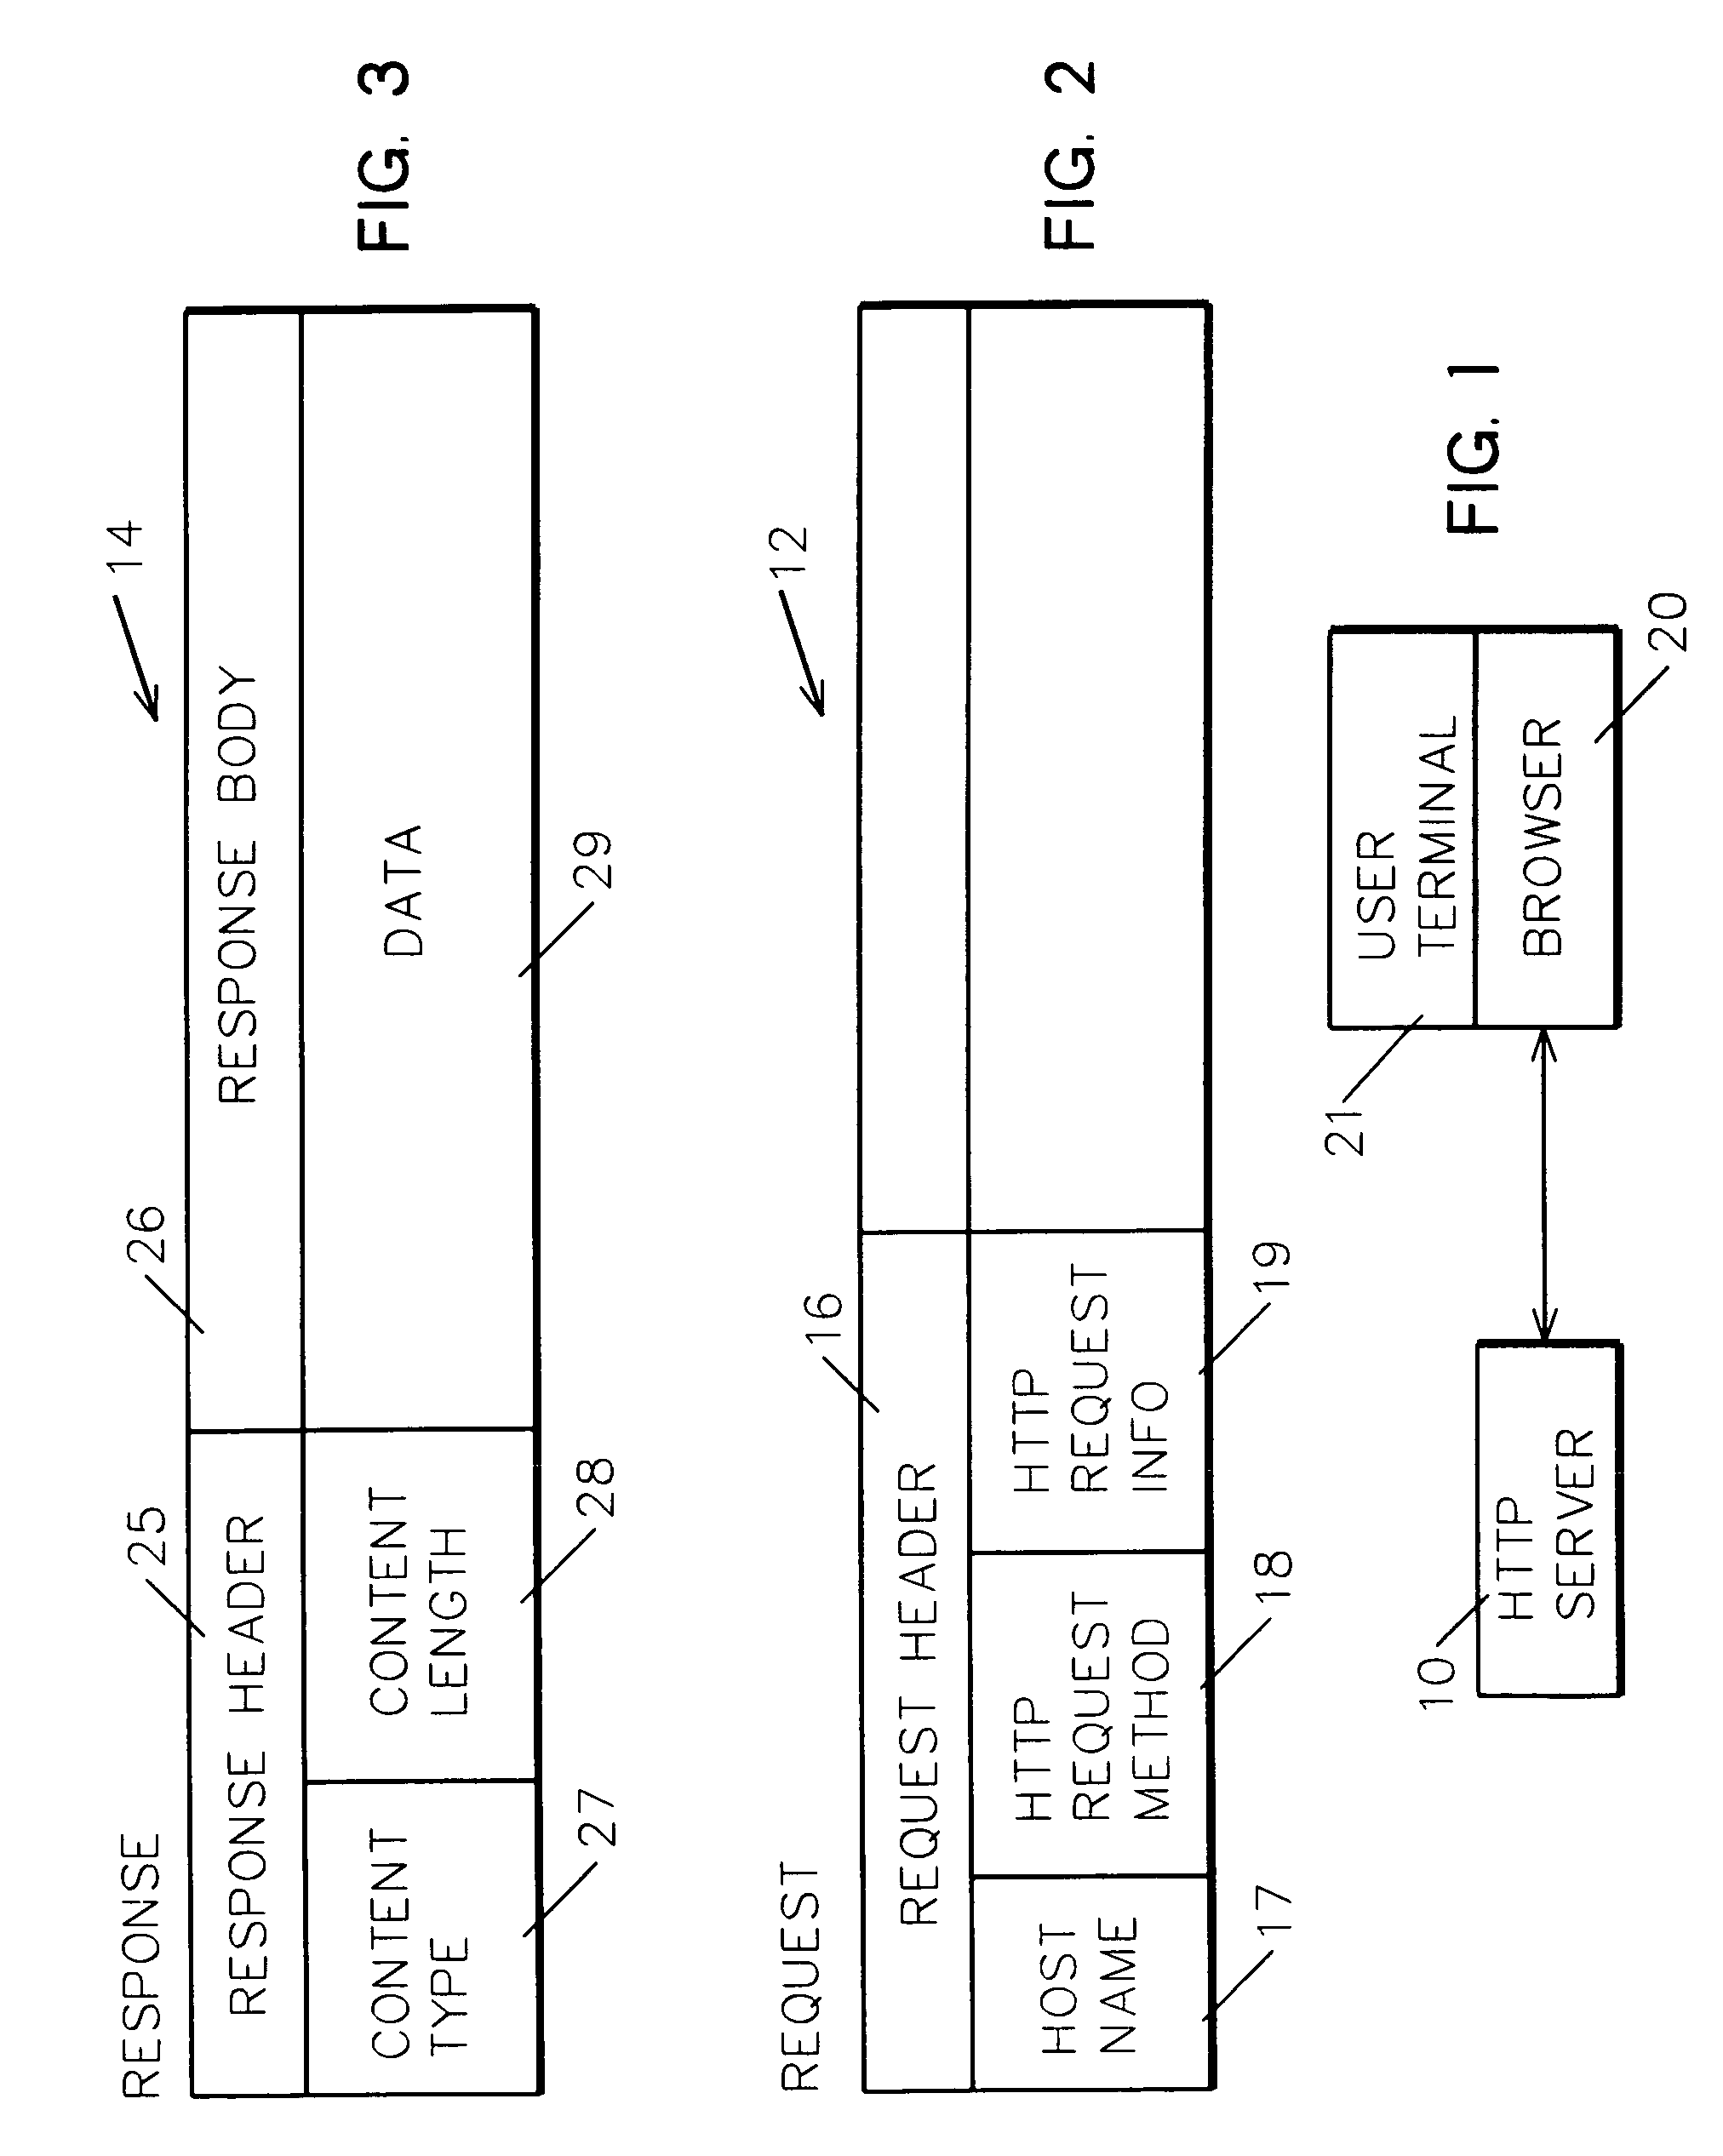 System and method for variable size retrieval of webpage data